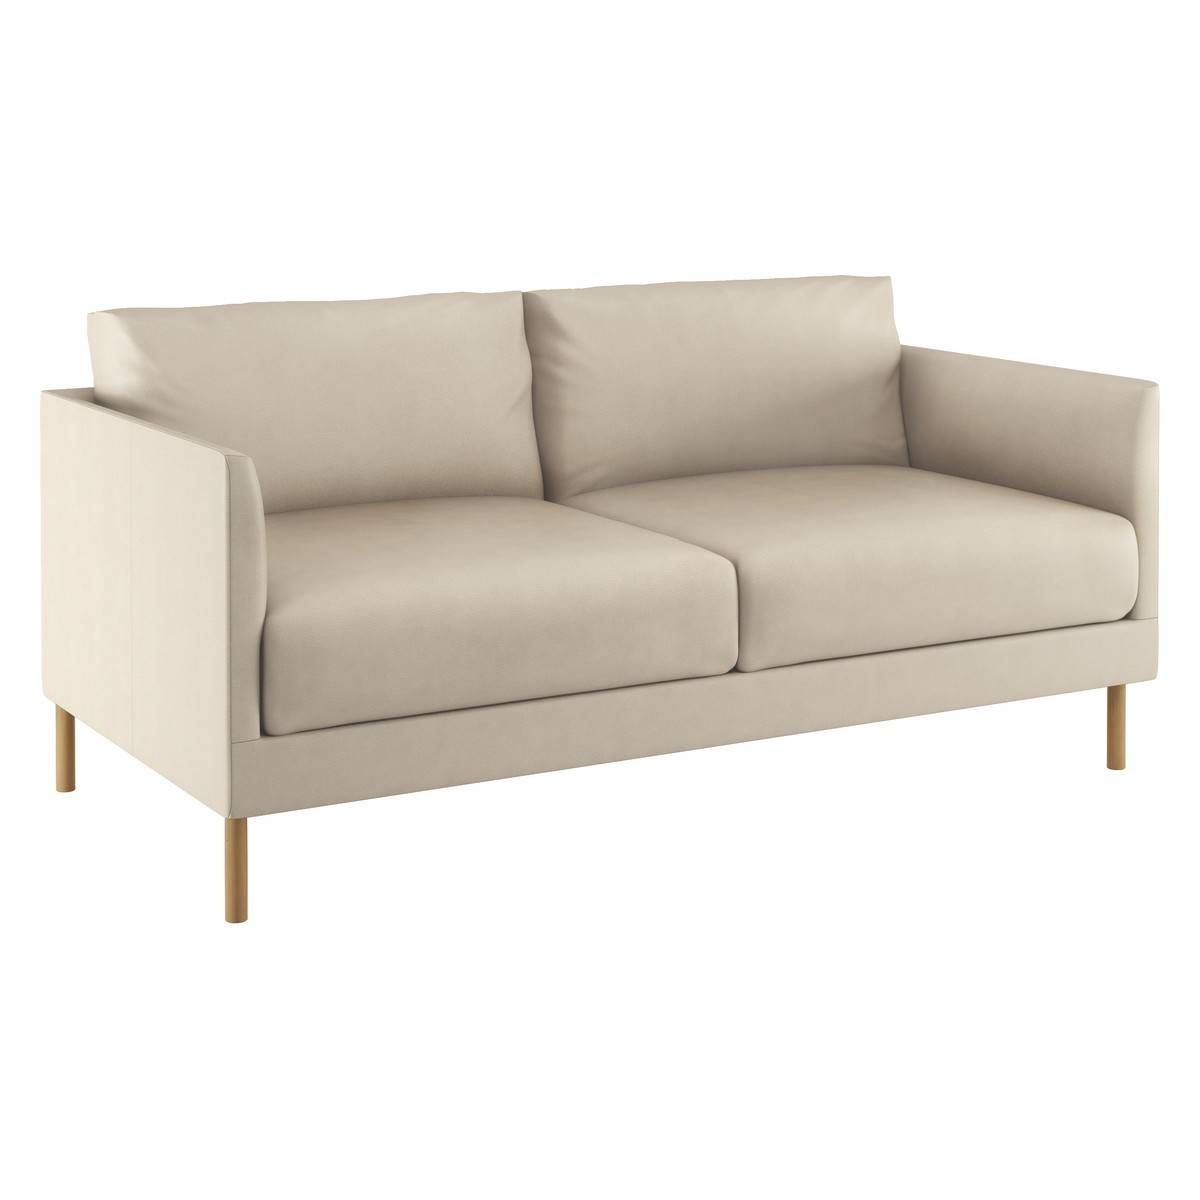 Hyde Cream Leather 2 Seater Sofa, Wooden Legs | Buy Now At Habitat Uk Intended For Wood Legs Sofas (Photo 30 of 30)